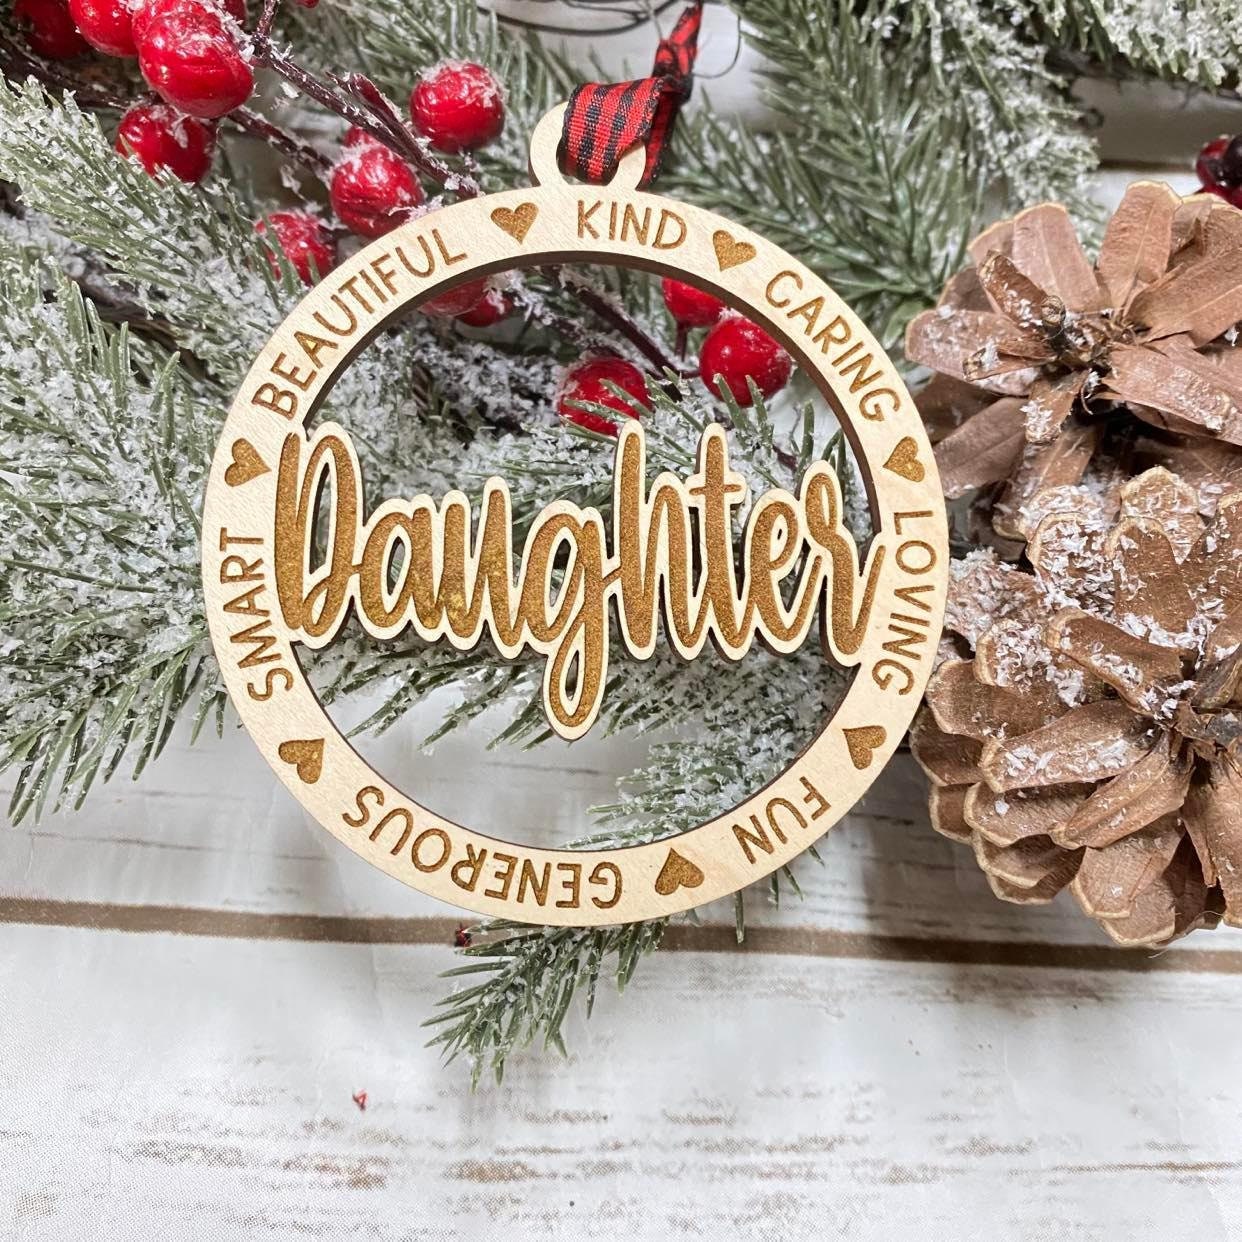 PERSONALIZED Christmas Trees - Shop - LV Laser Engraving